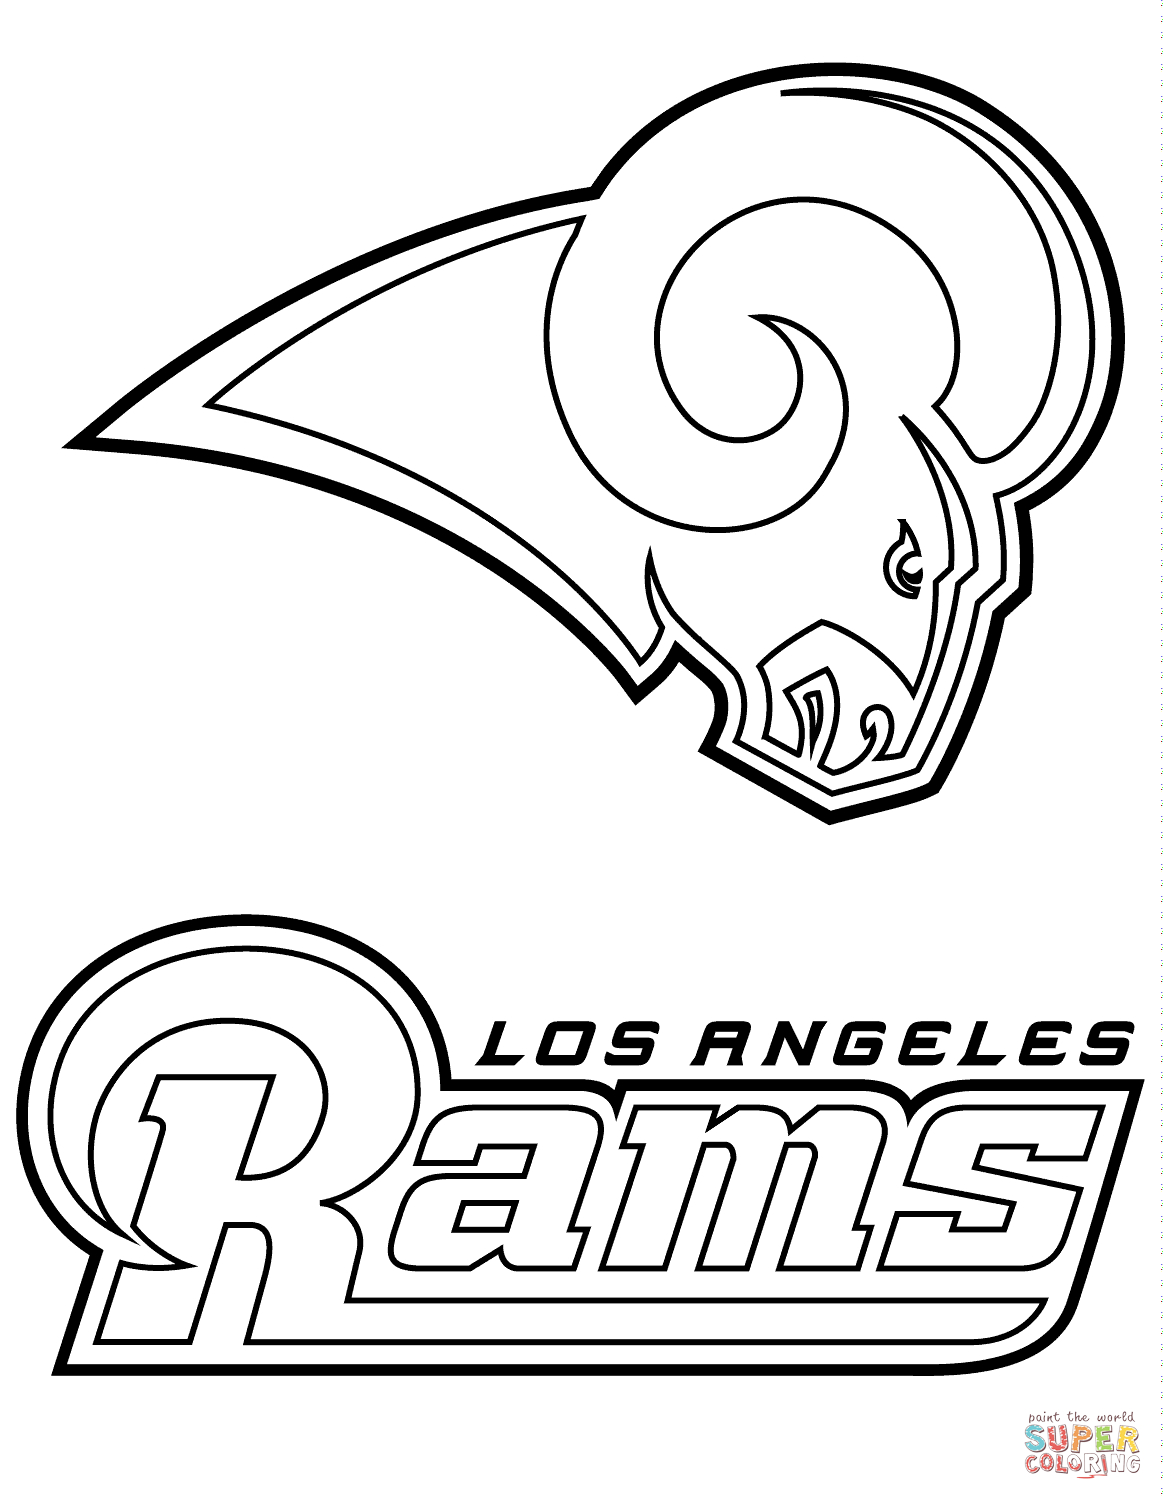 Super Bowl Coloring Pages Free Los Angeles Rams Logo Coloring Page Free Printable Coloring Pages